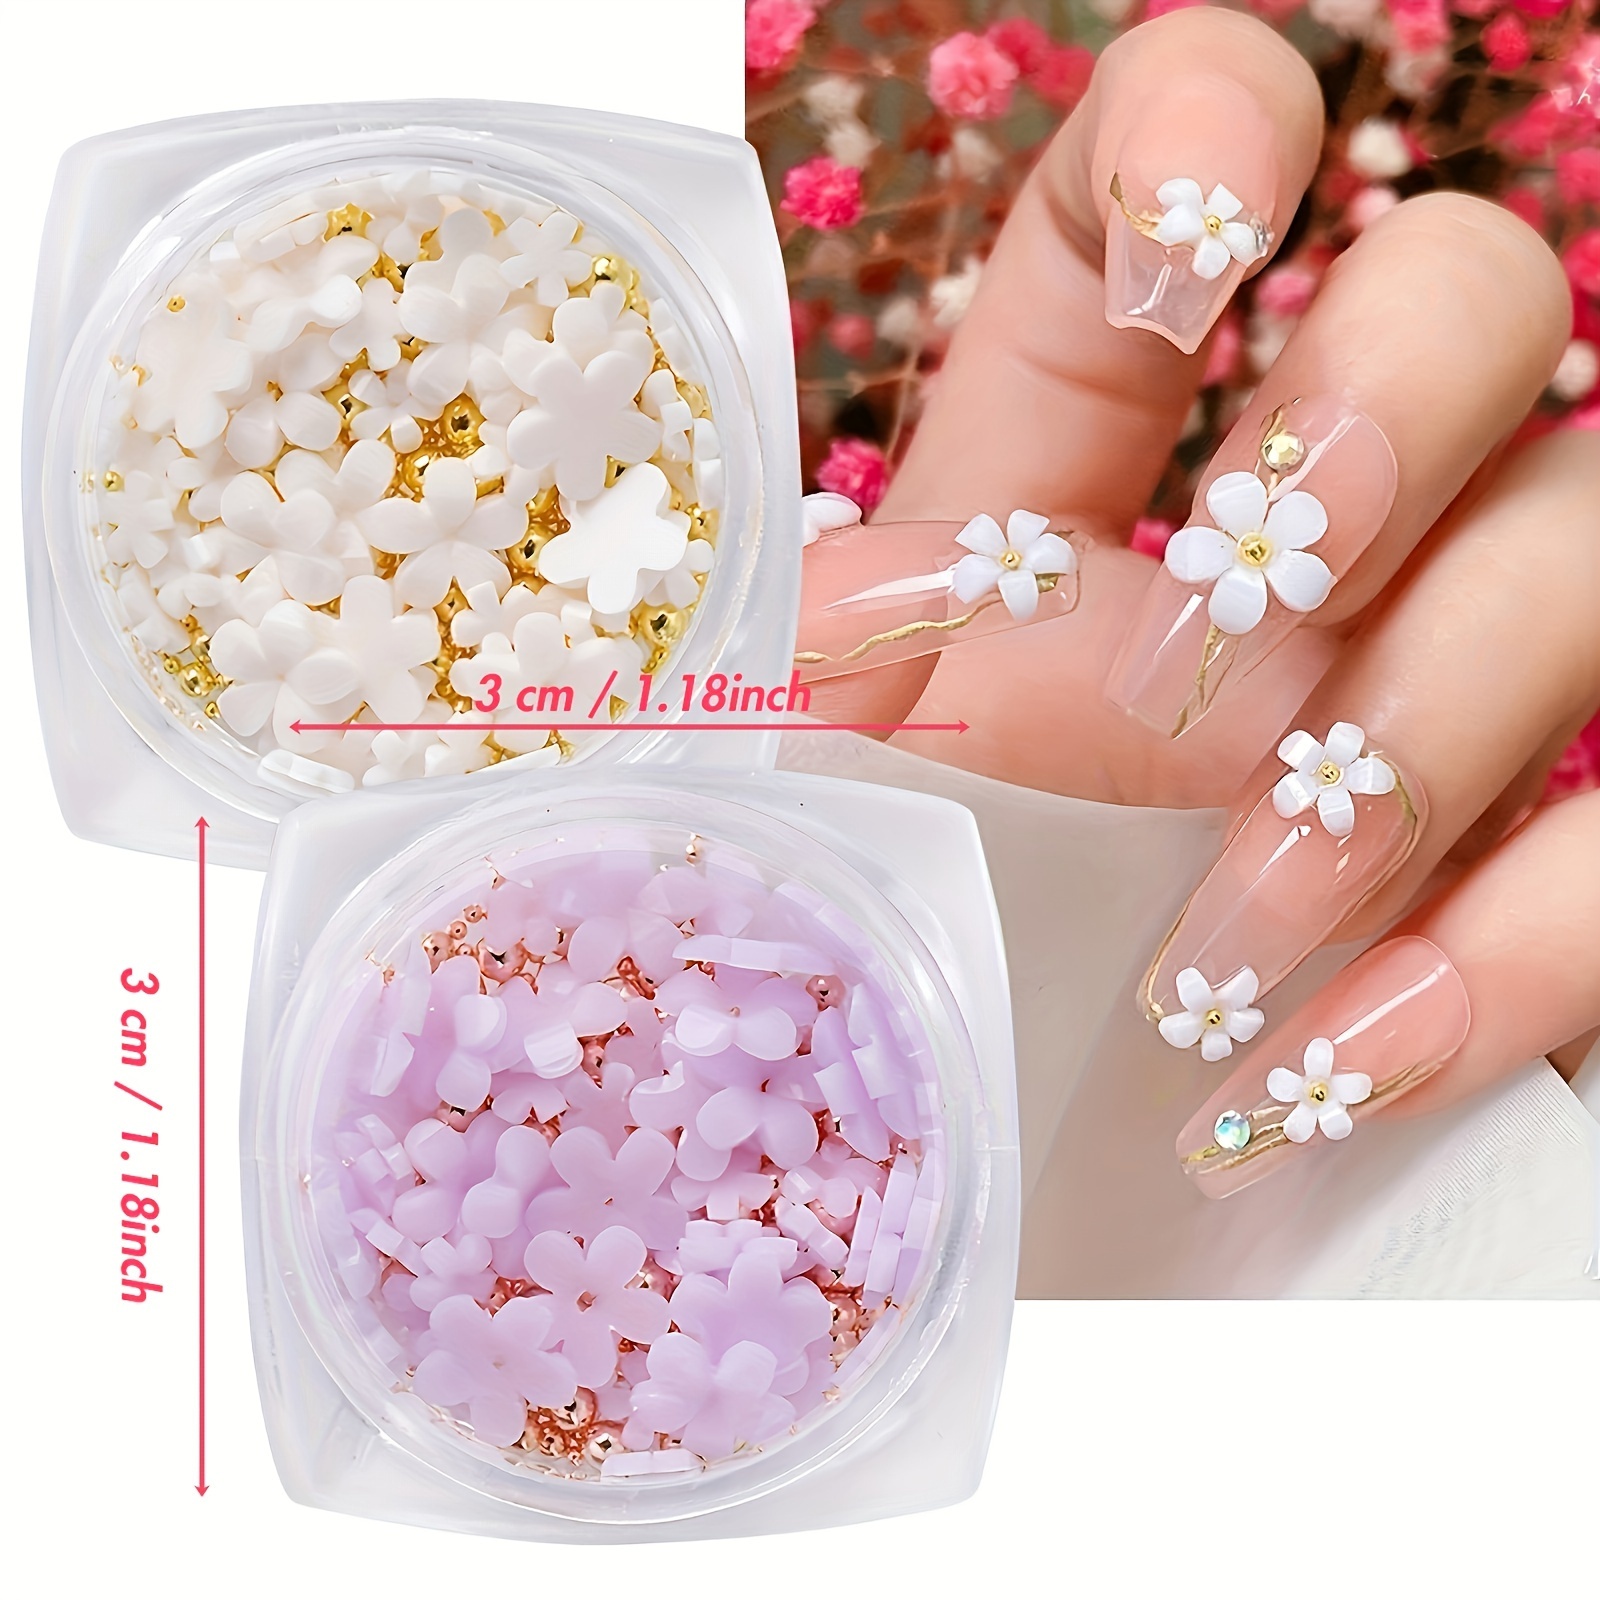 12 Grids 3D Acrylic Flower Charms Nail Art Decorations Mixed Cherry Blossom  DIY Jewelry Gem Beads Nails Design Accessories